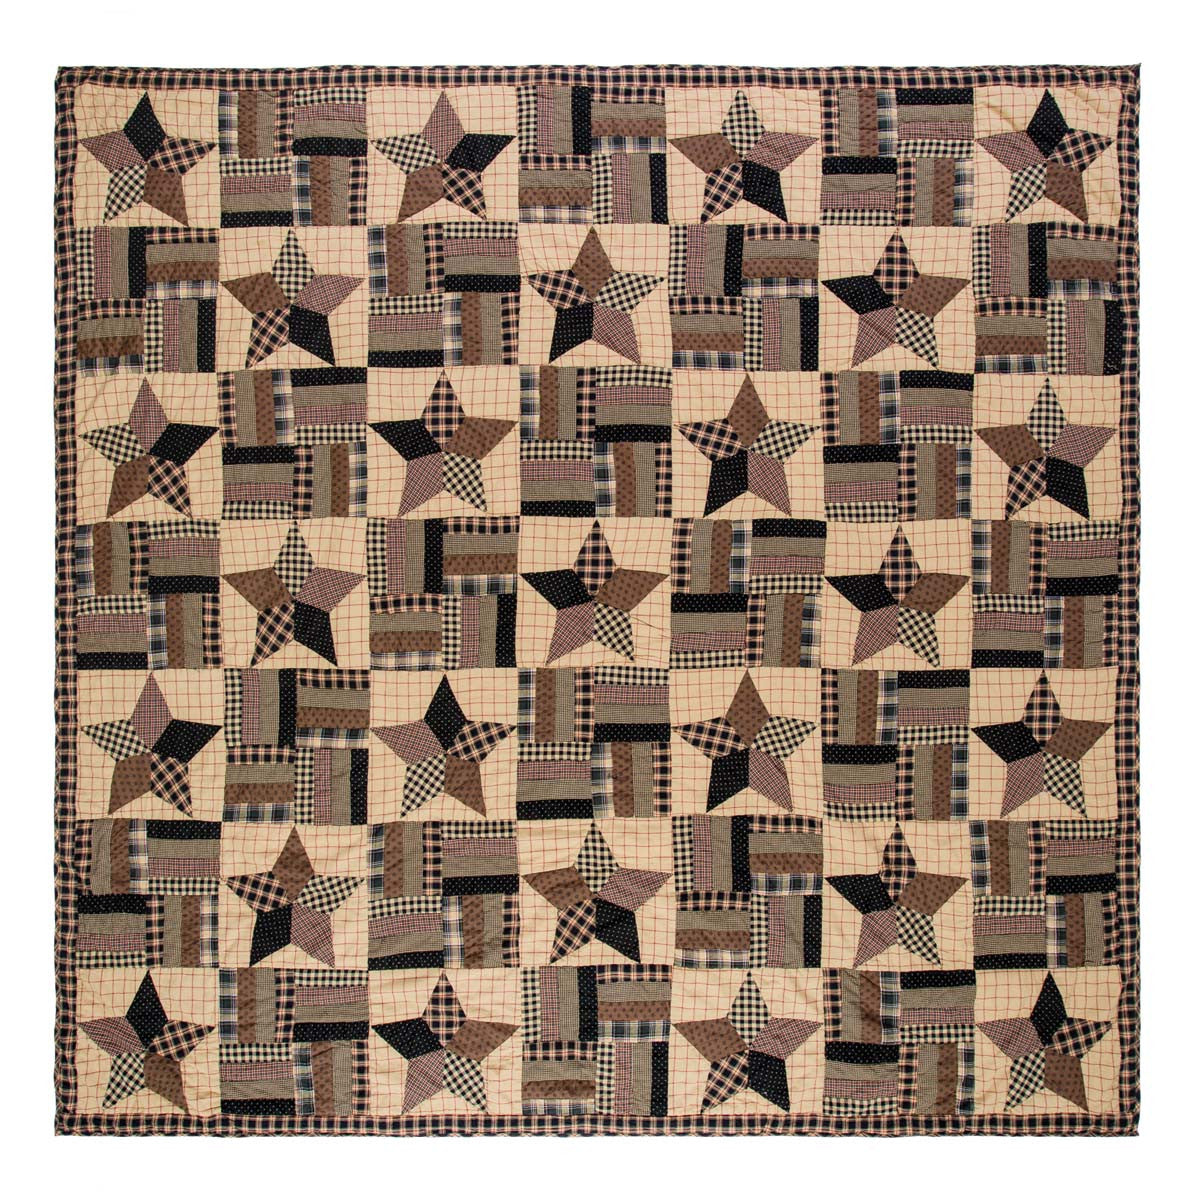 Bingham Star Quilted Collection QUILT